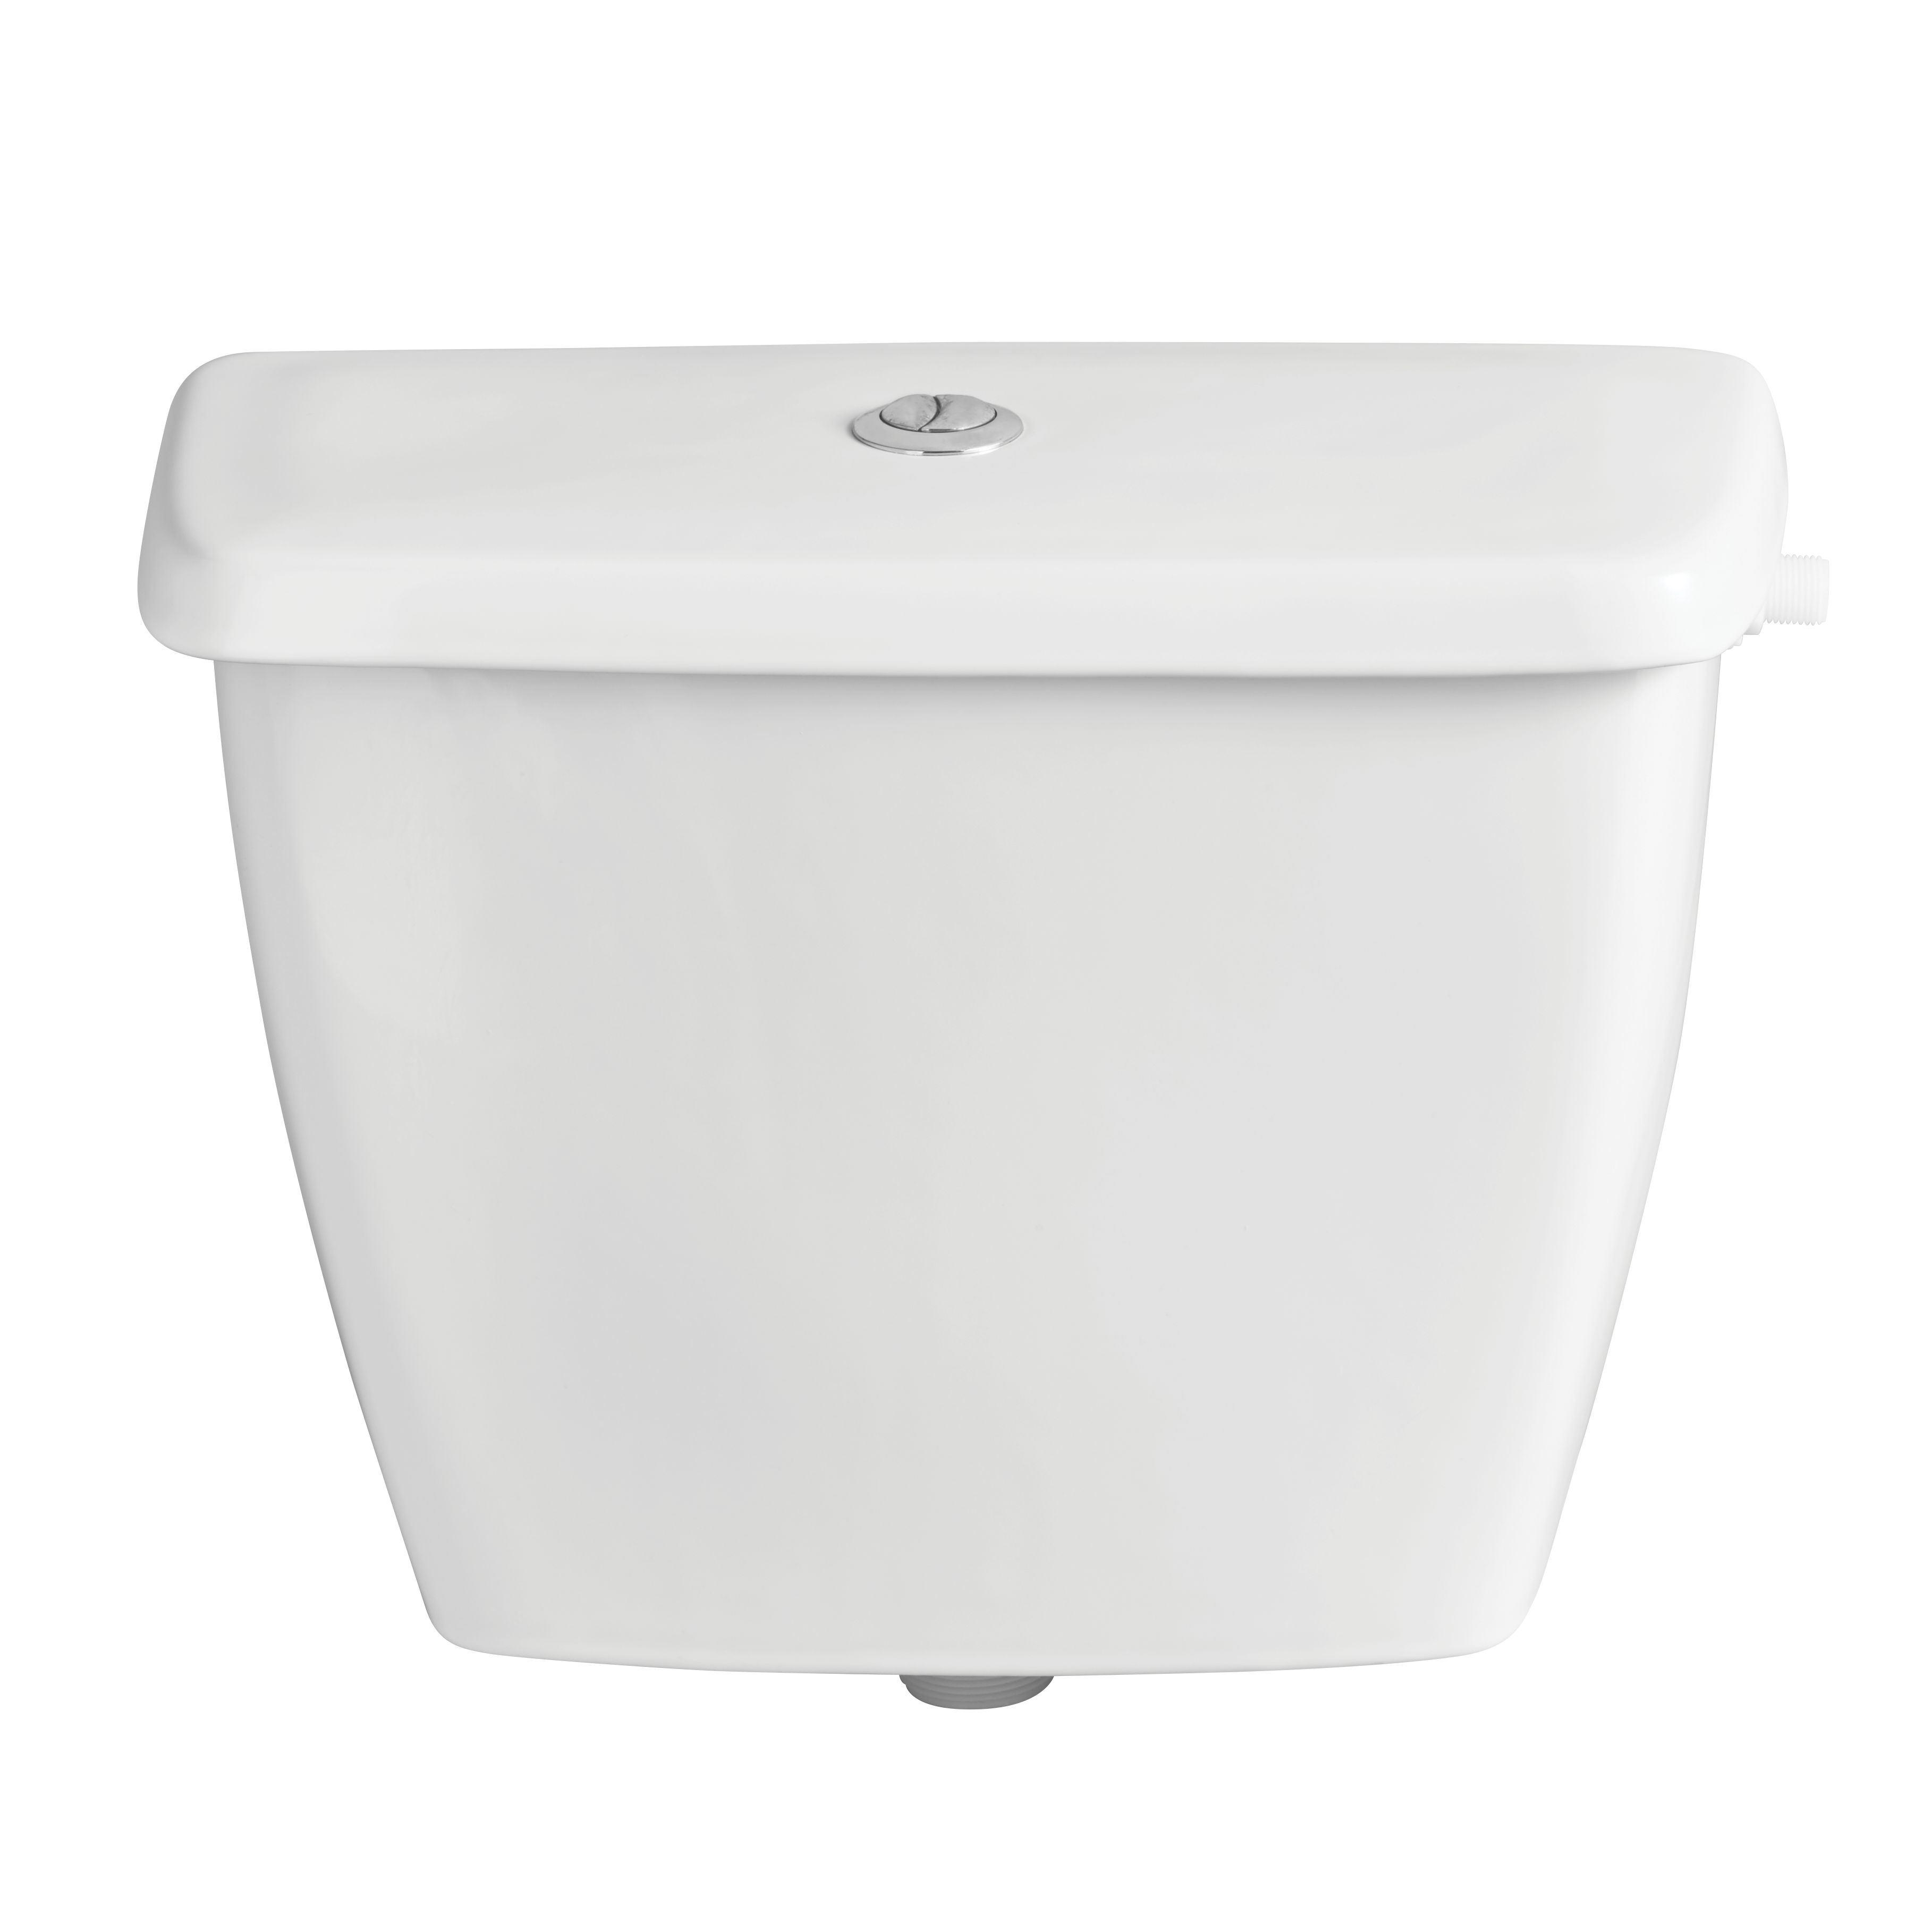 Image of Wickes Ceramic Low Level Cistern